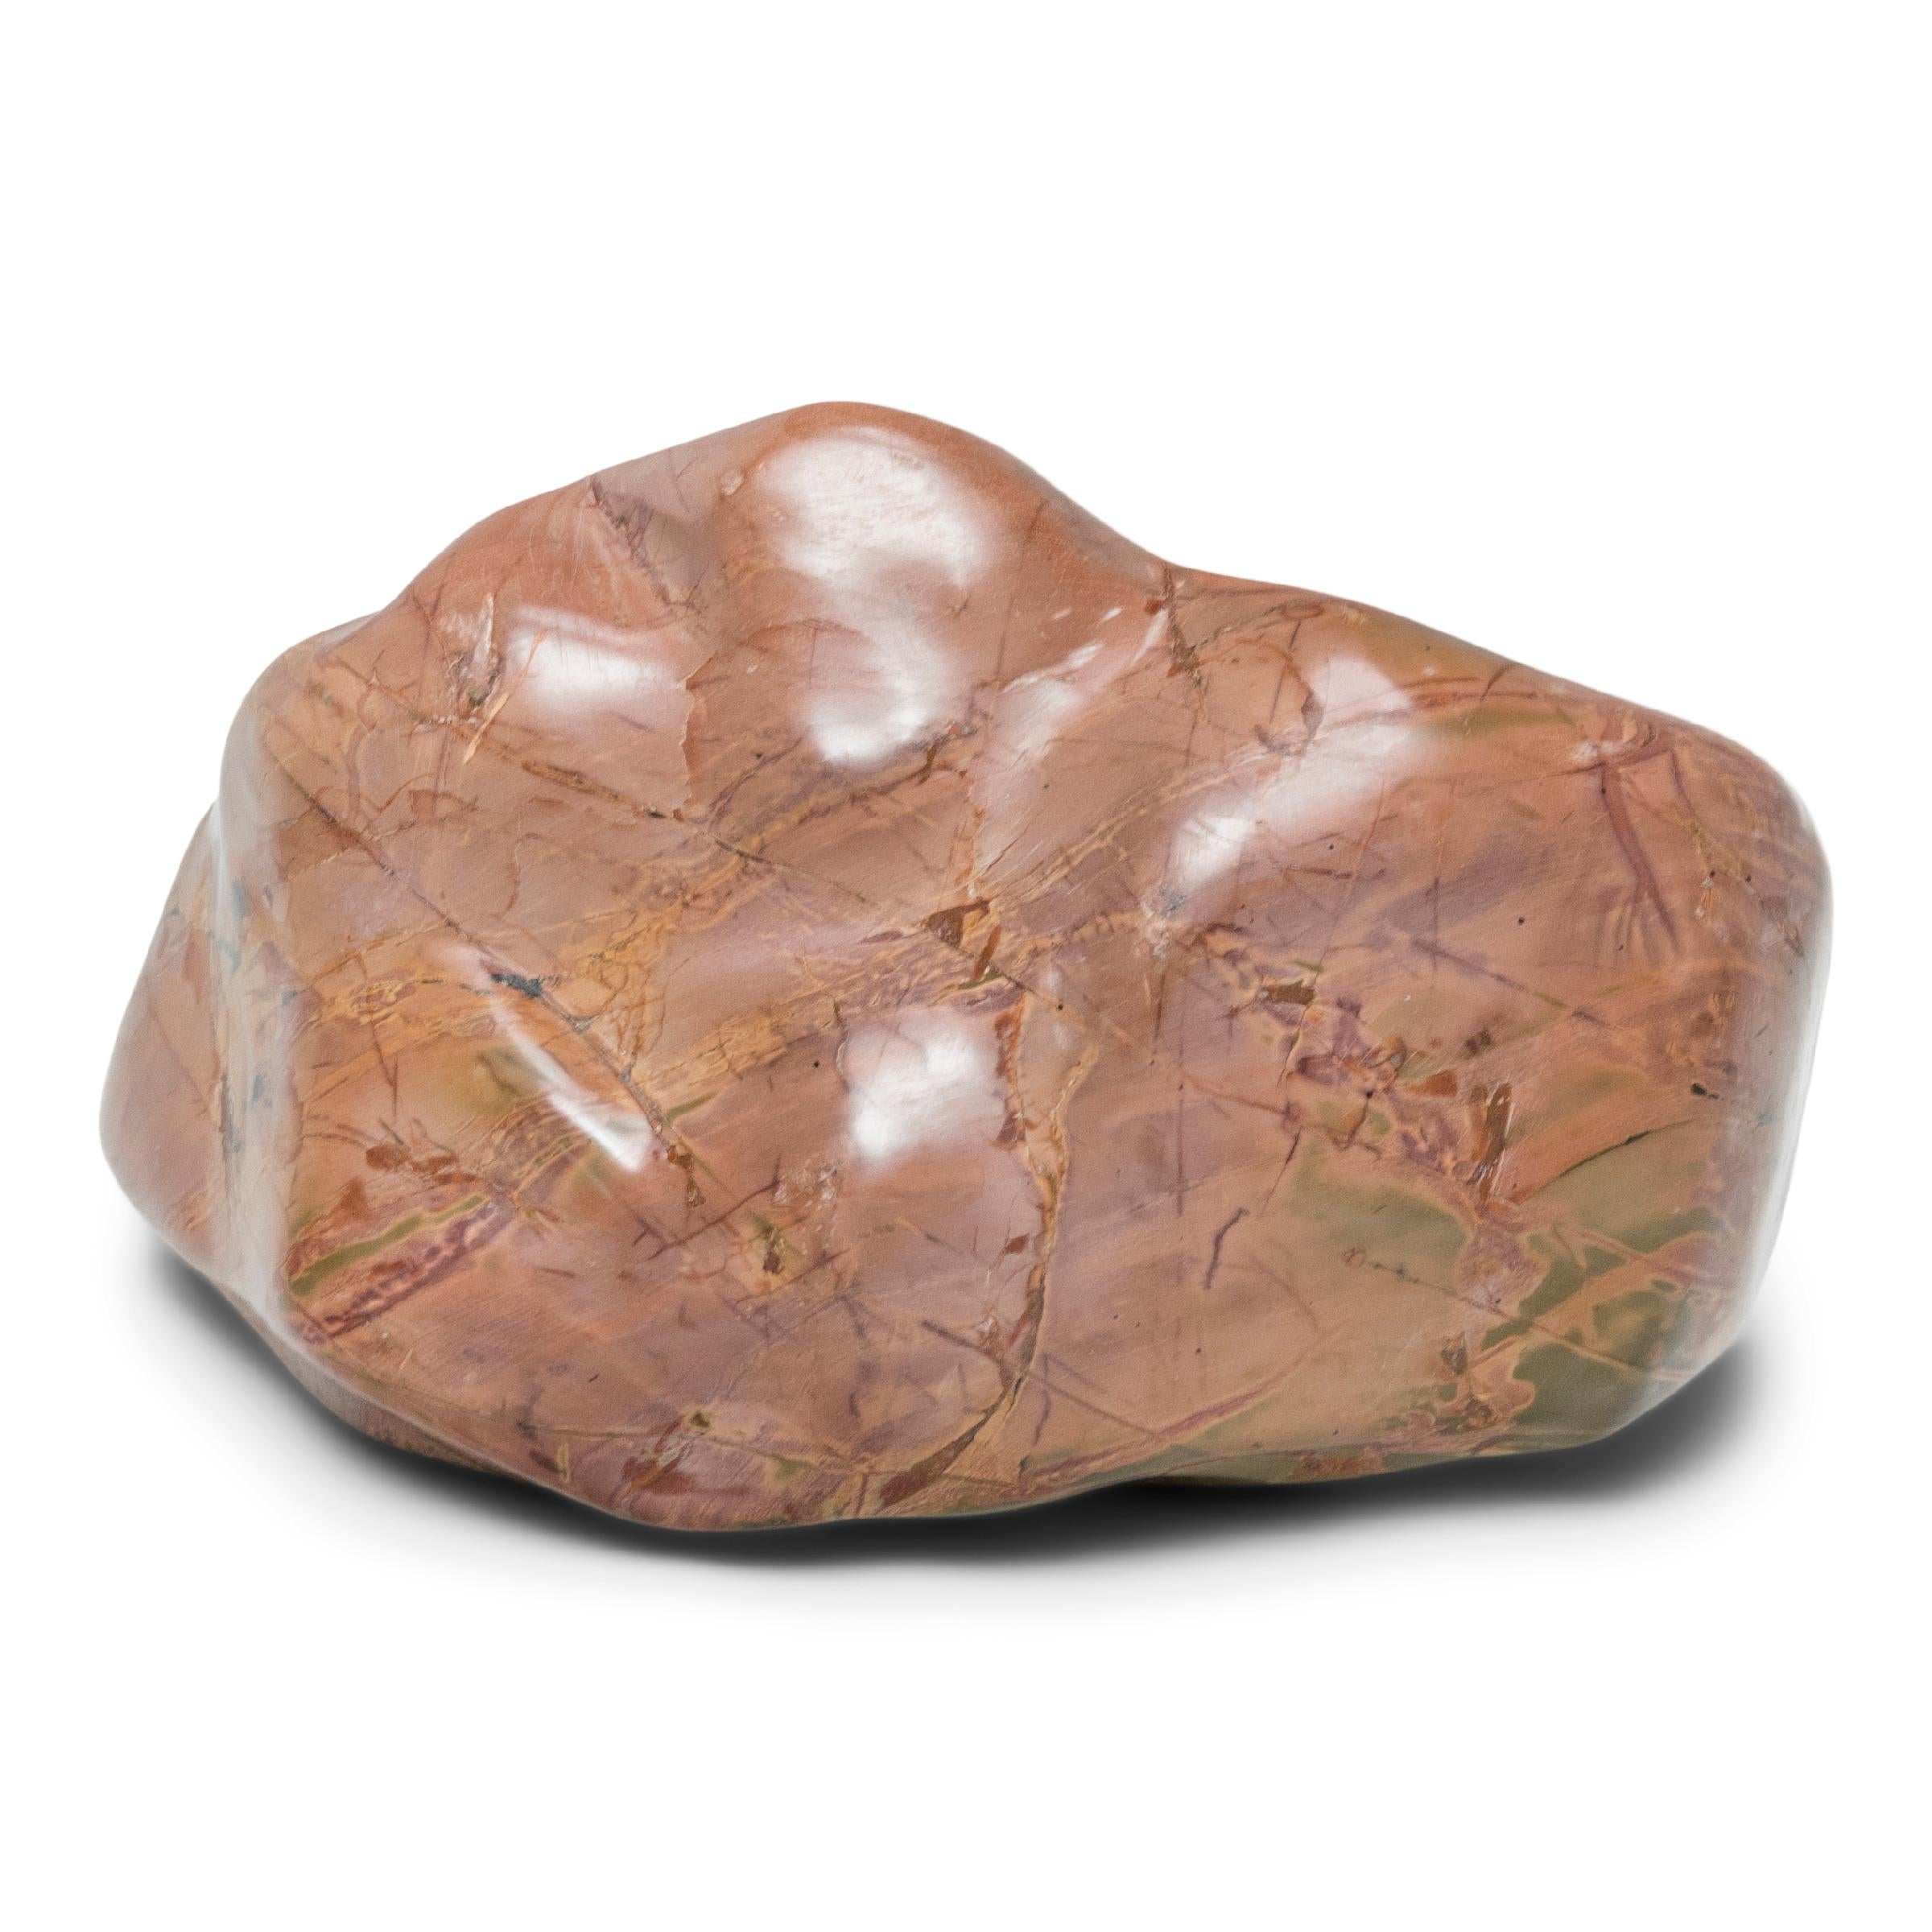 A well-chosen stone is a focal point of both a traditional Chinese garden and a scholar's studio - evoking the complexities of nature and inspiring creative thought. This meditation stone has a subtle pattern of thin green-and-red strata, the result